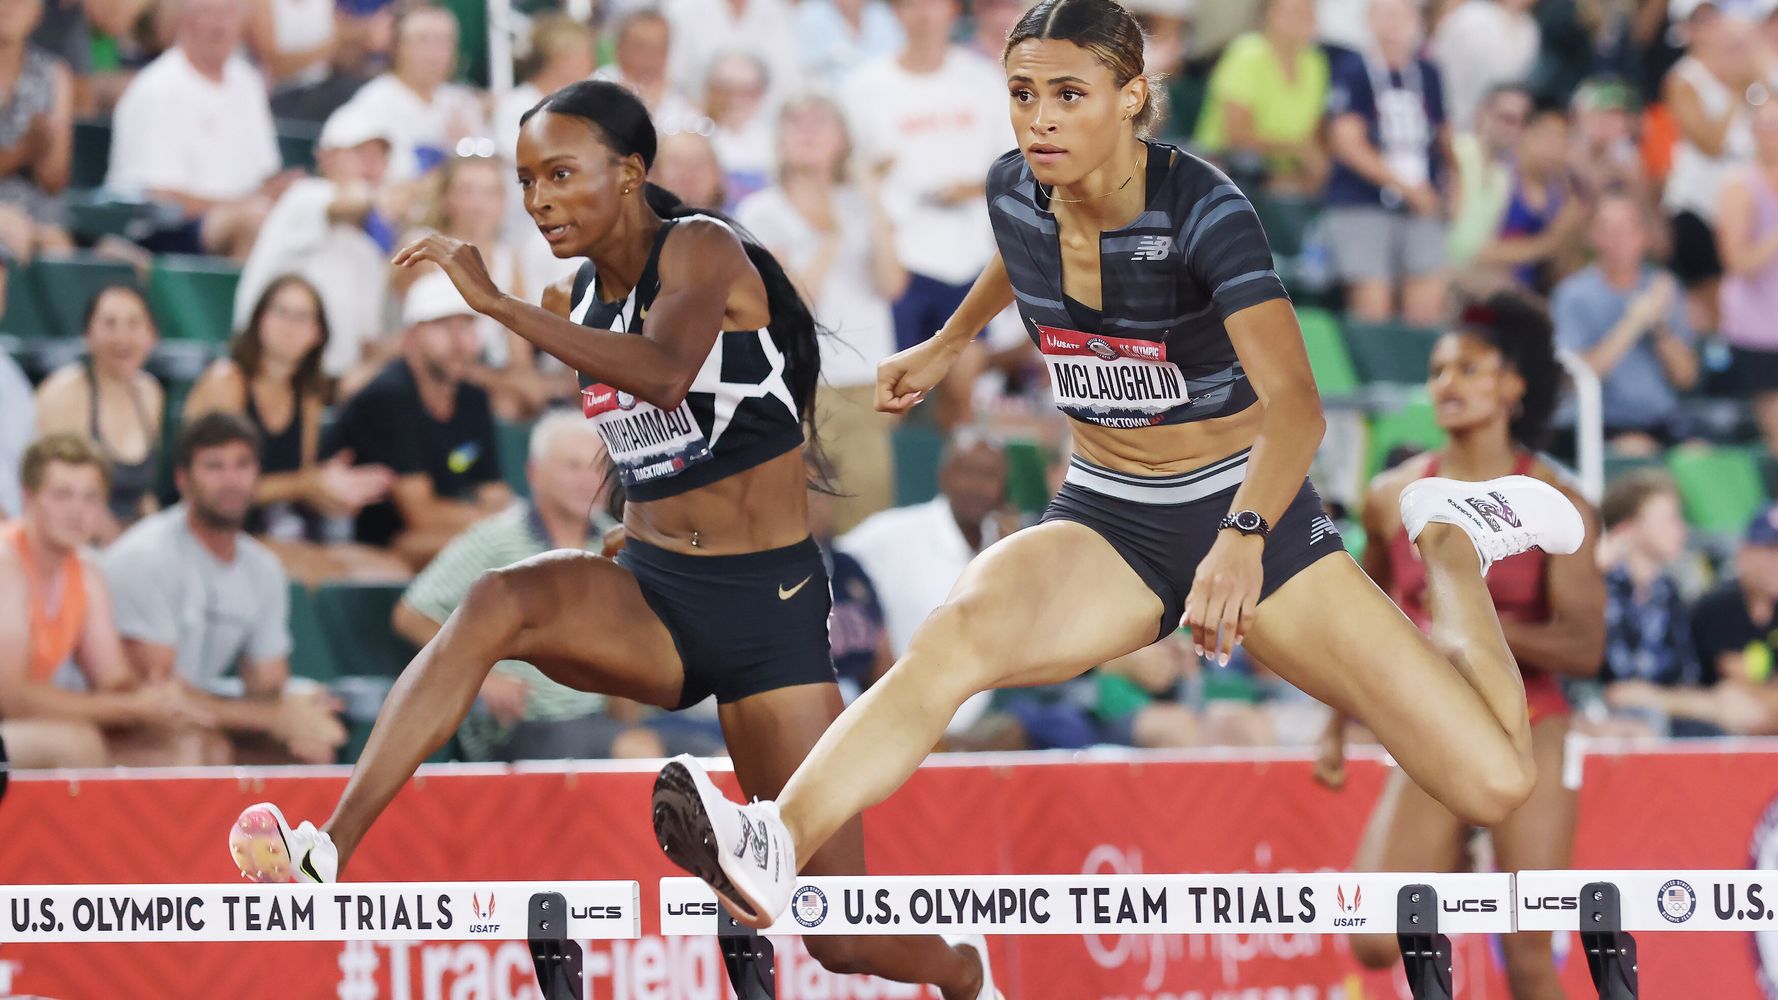 Sydney Mclaughlin Shatters World Record In 400 Meter Hurdles At U S Olympic Trials Huffpost